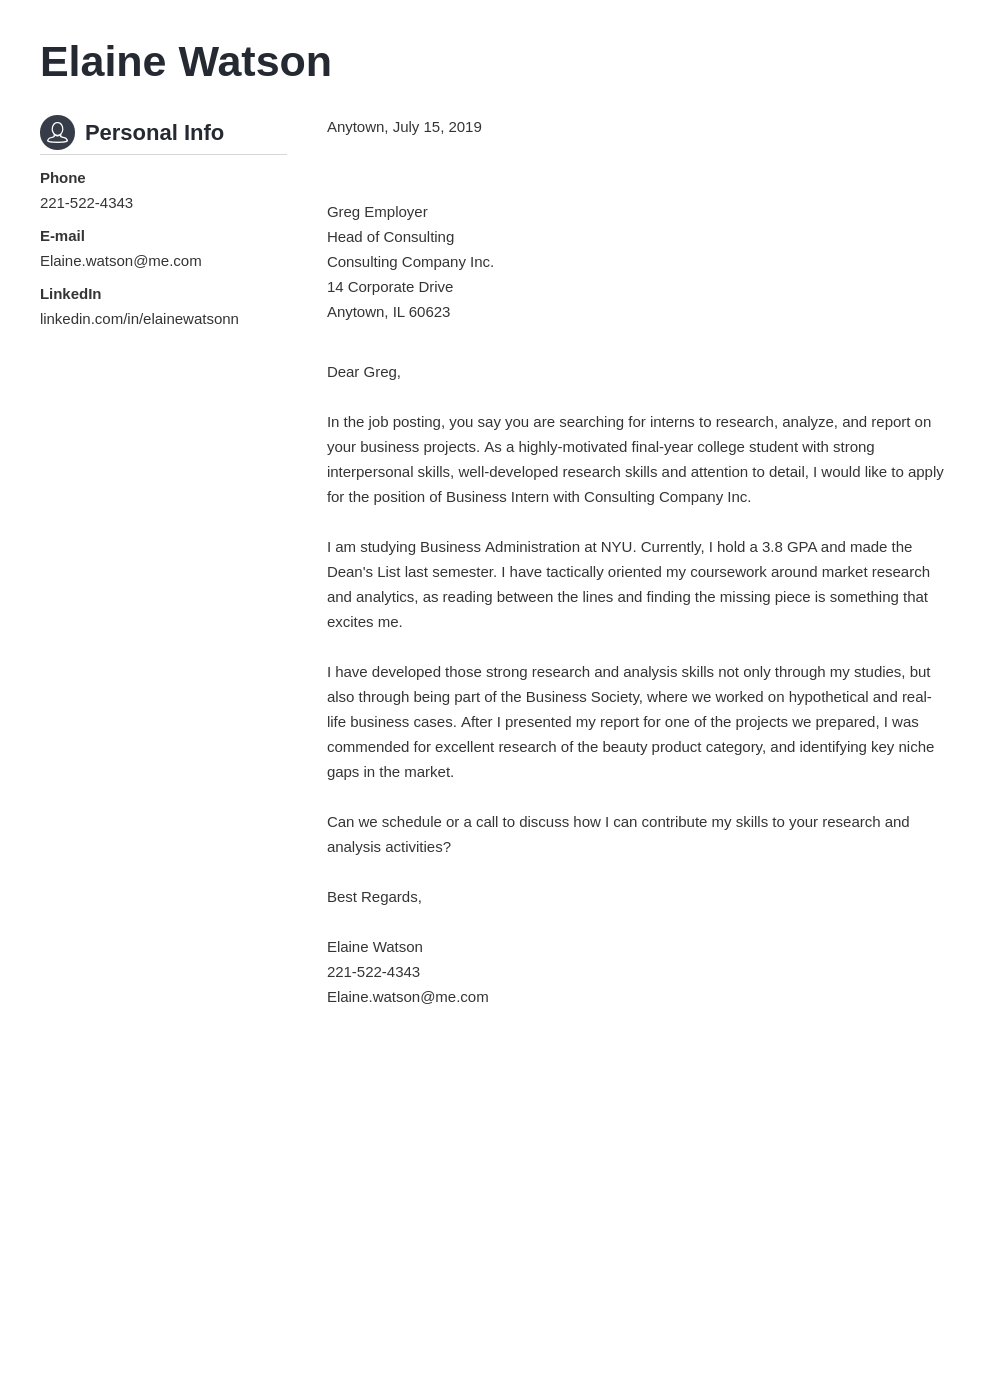 business cover letter template free